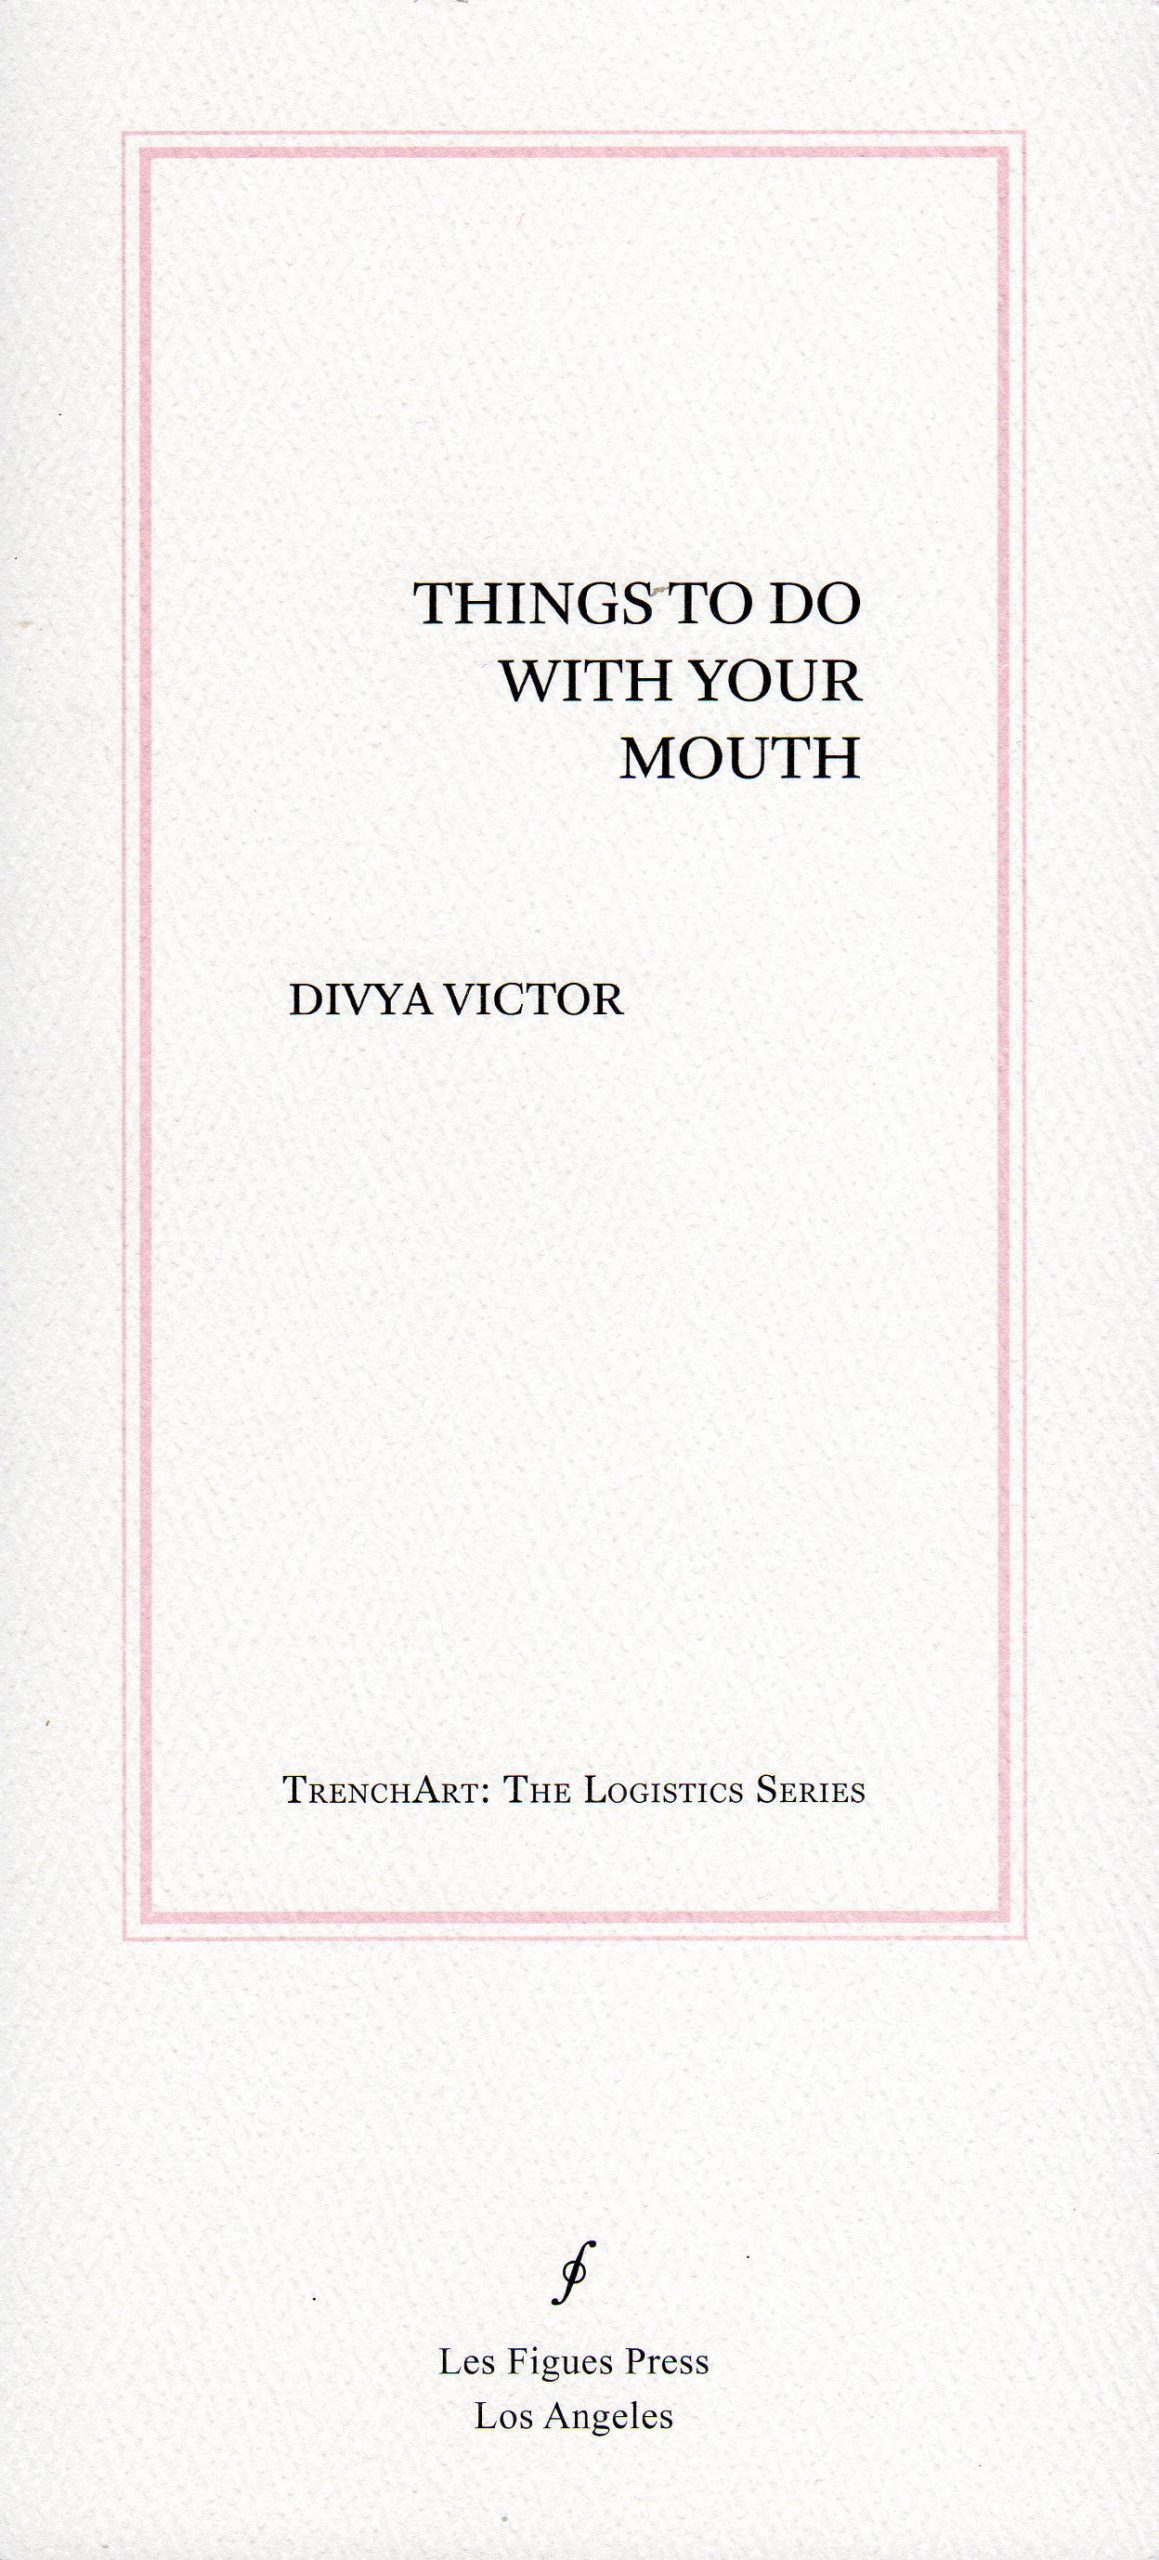 things-to-do-with-your-mouth-by-divya-victor.jpg